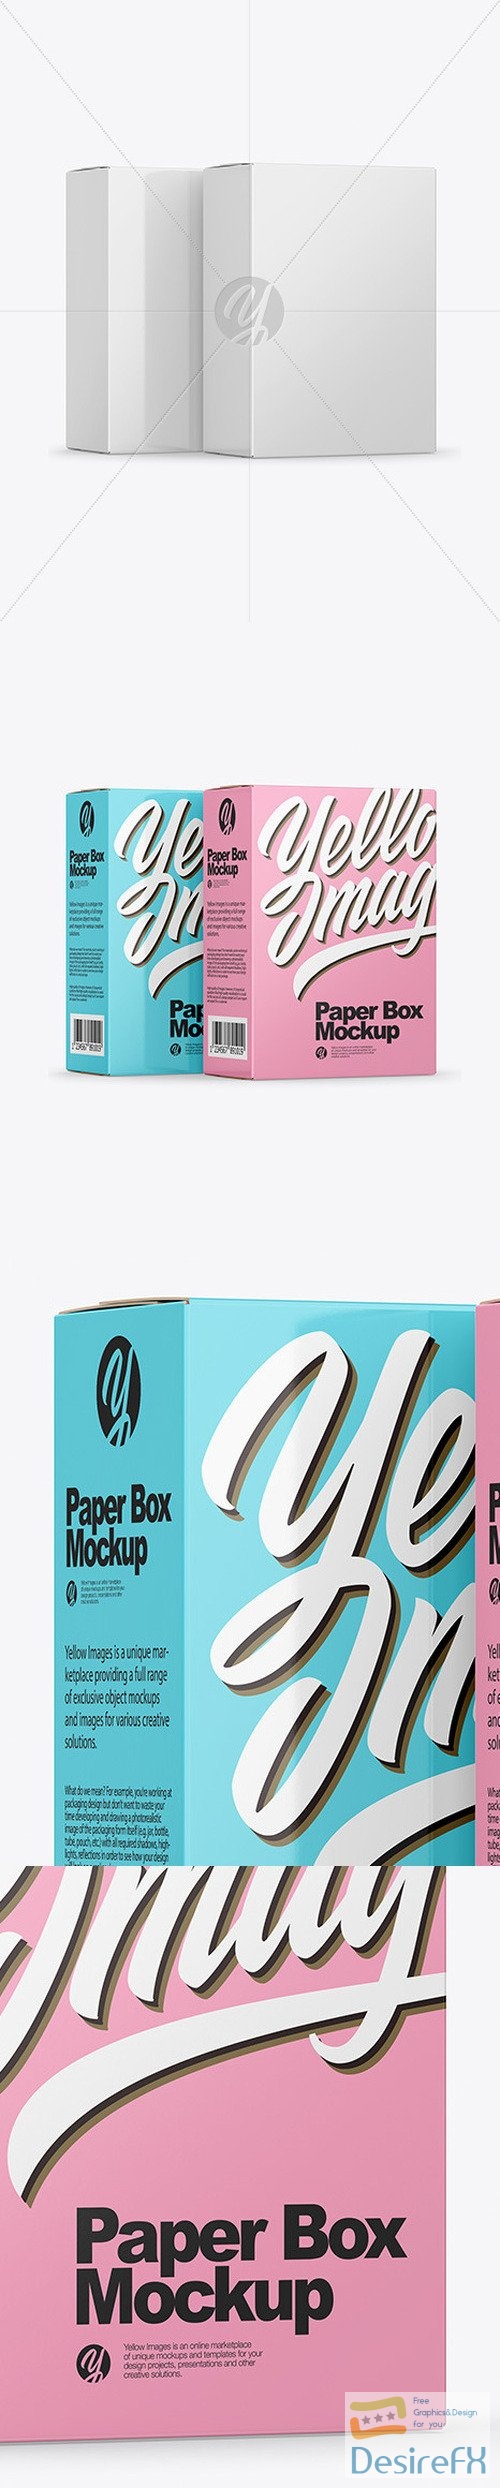 Two Paper Boxes Mockup 49997